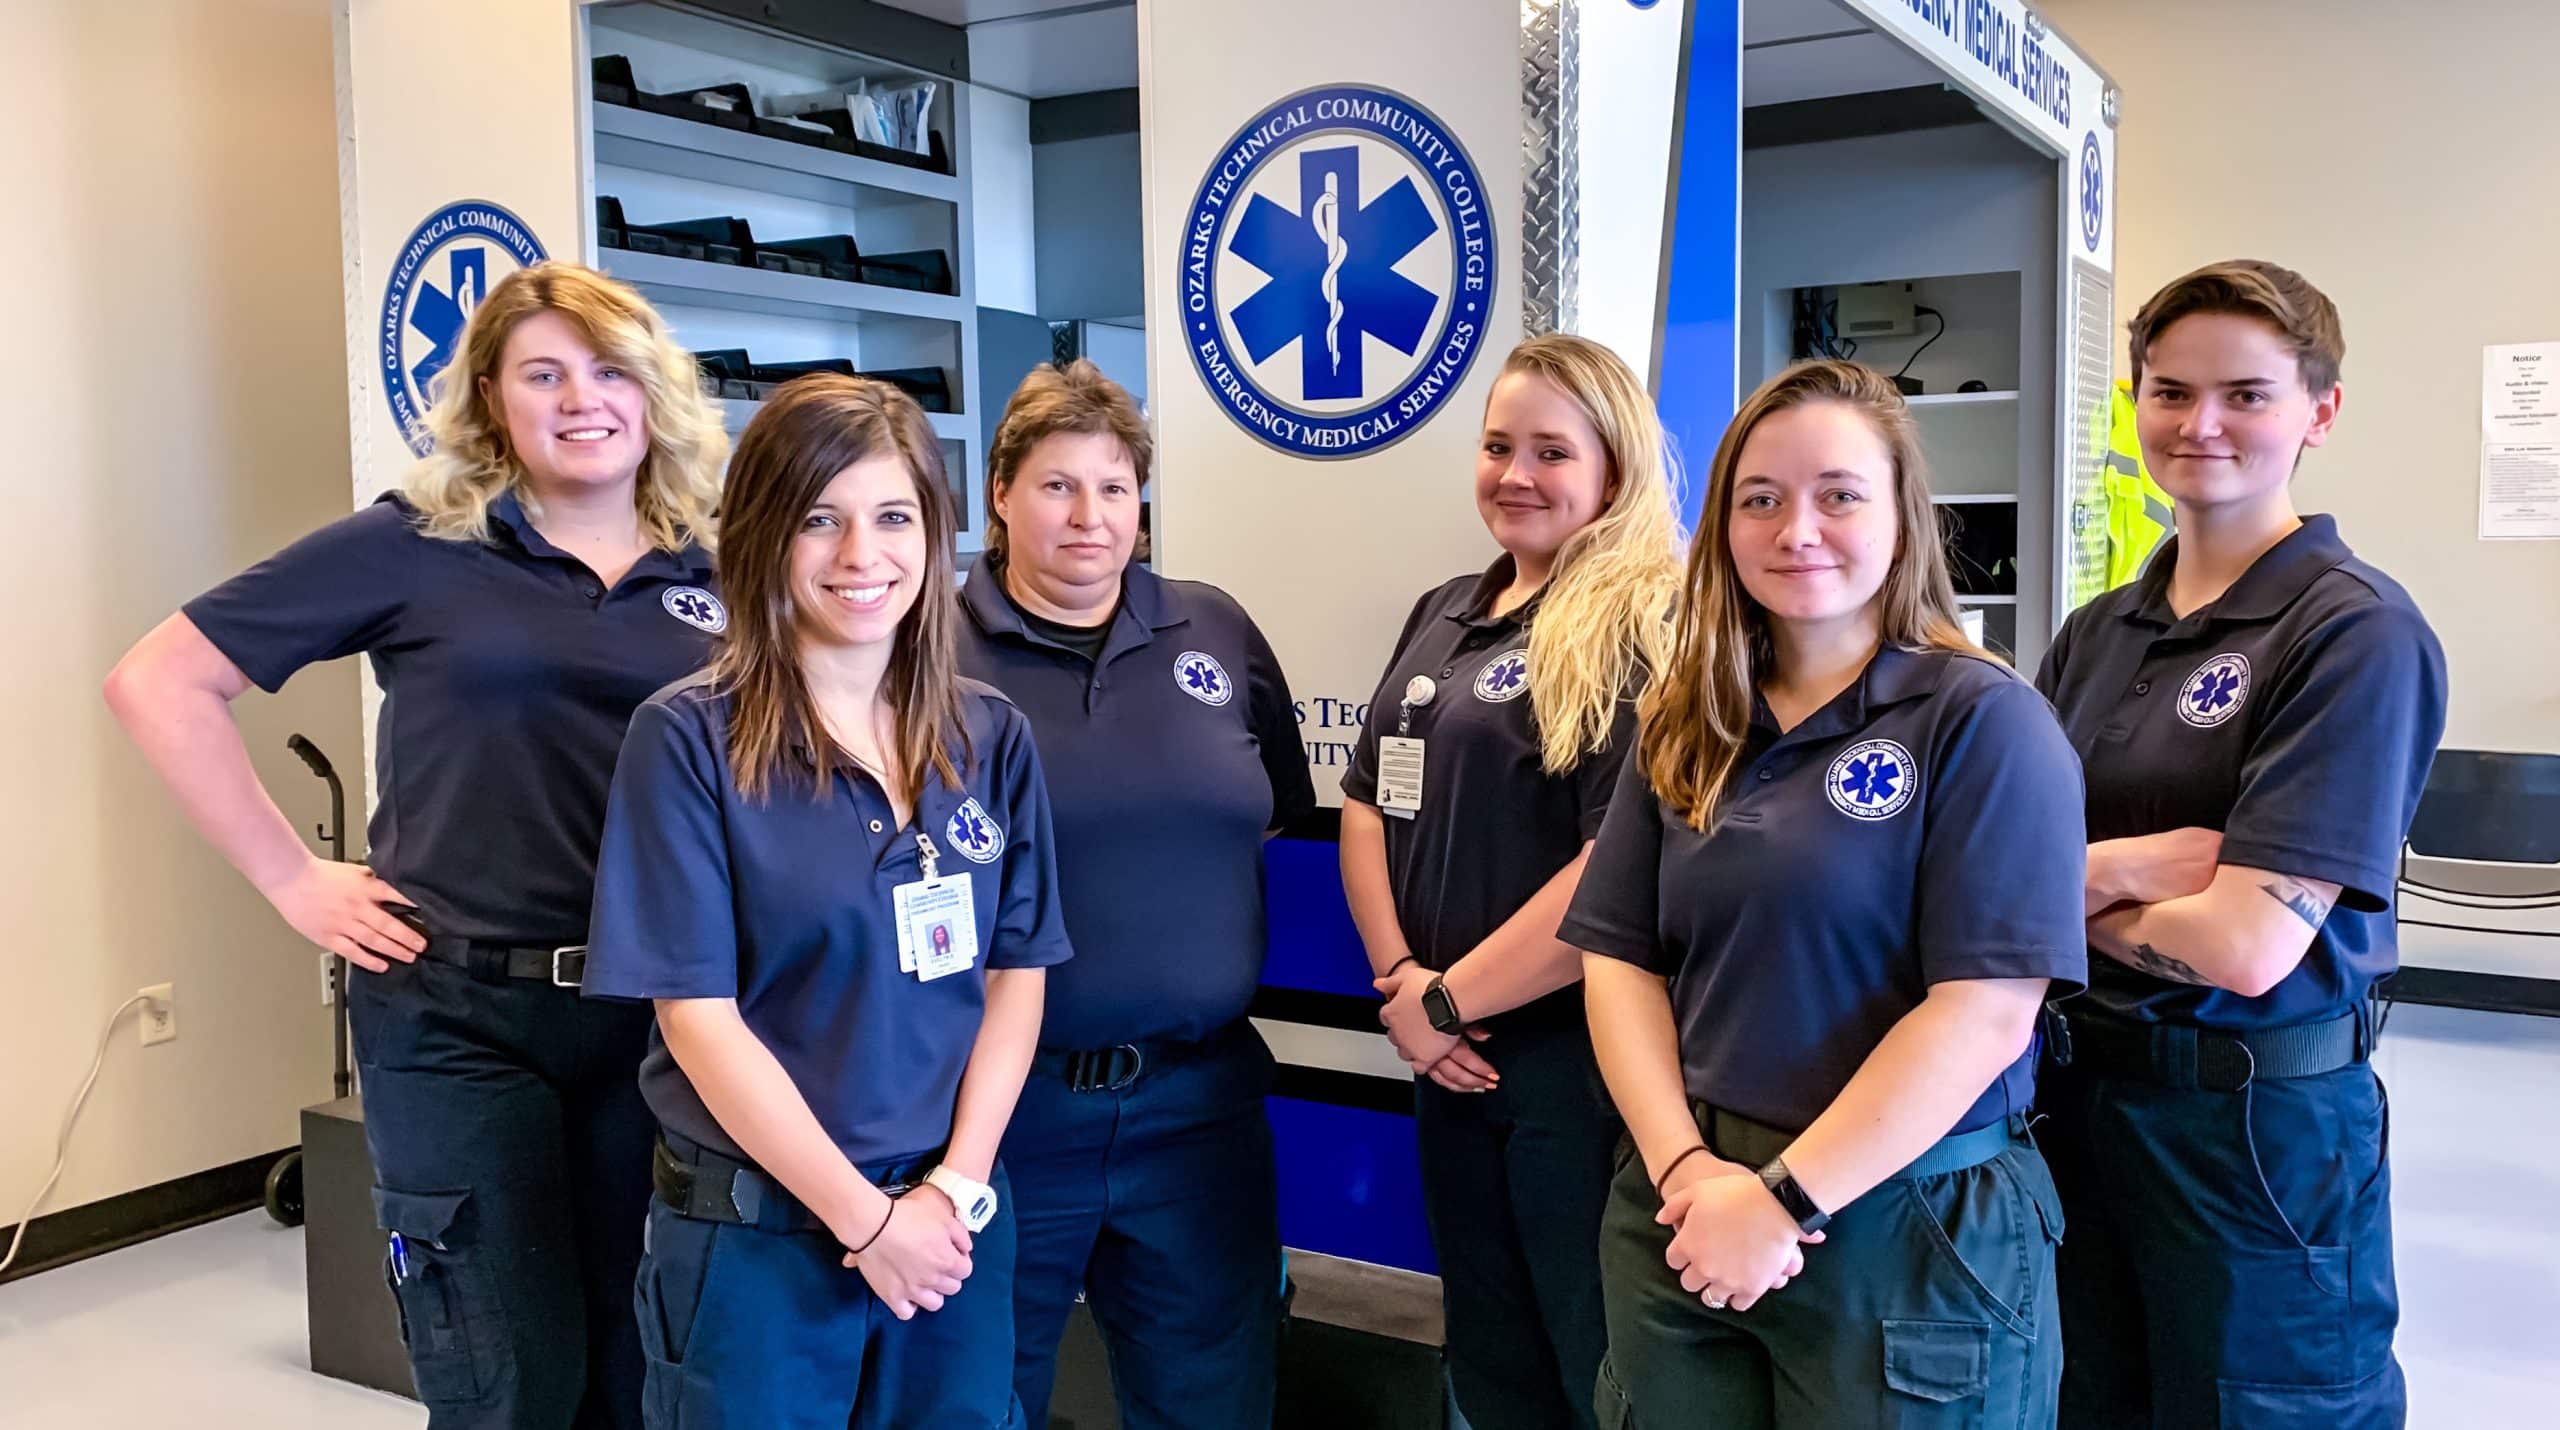 OTC paramedic students pose in front of an ambulance